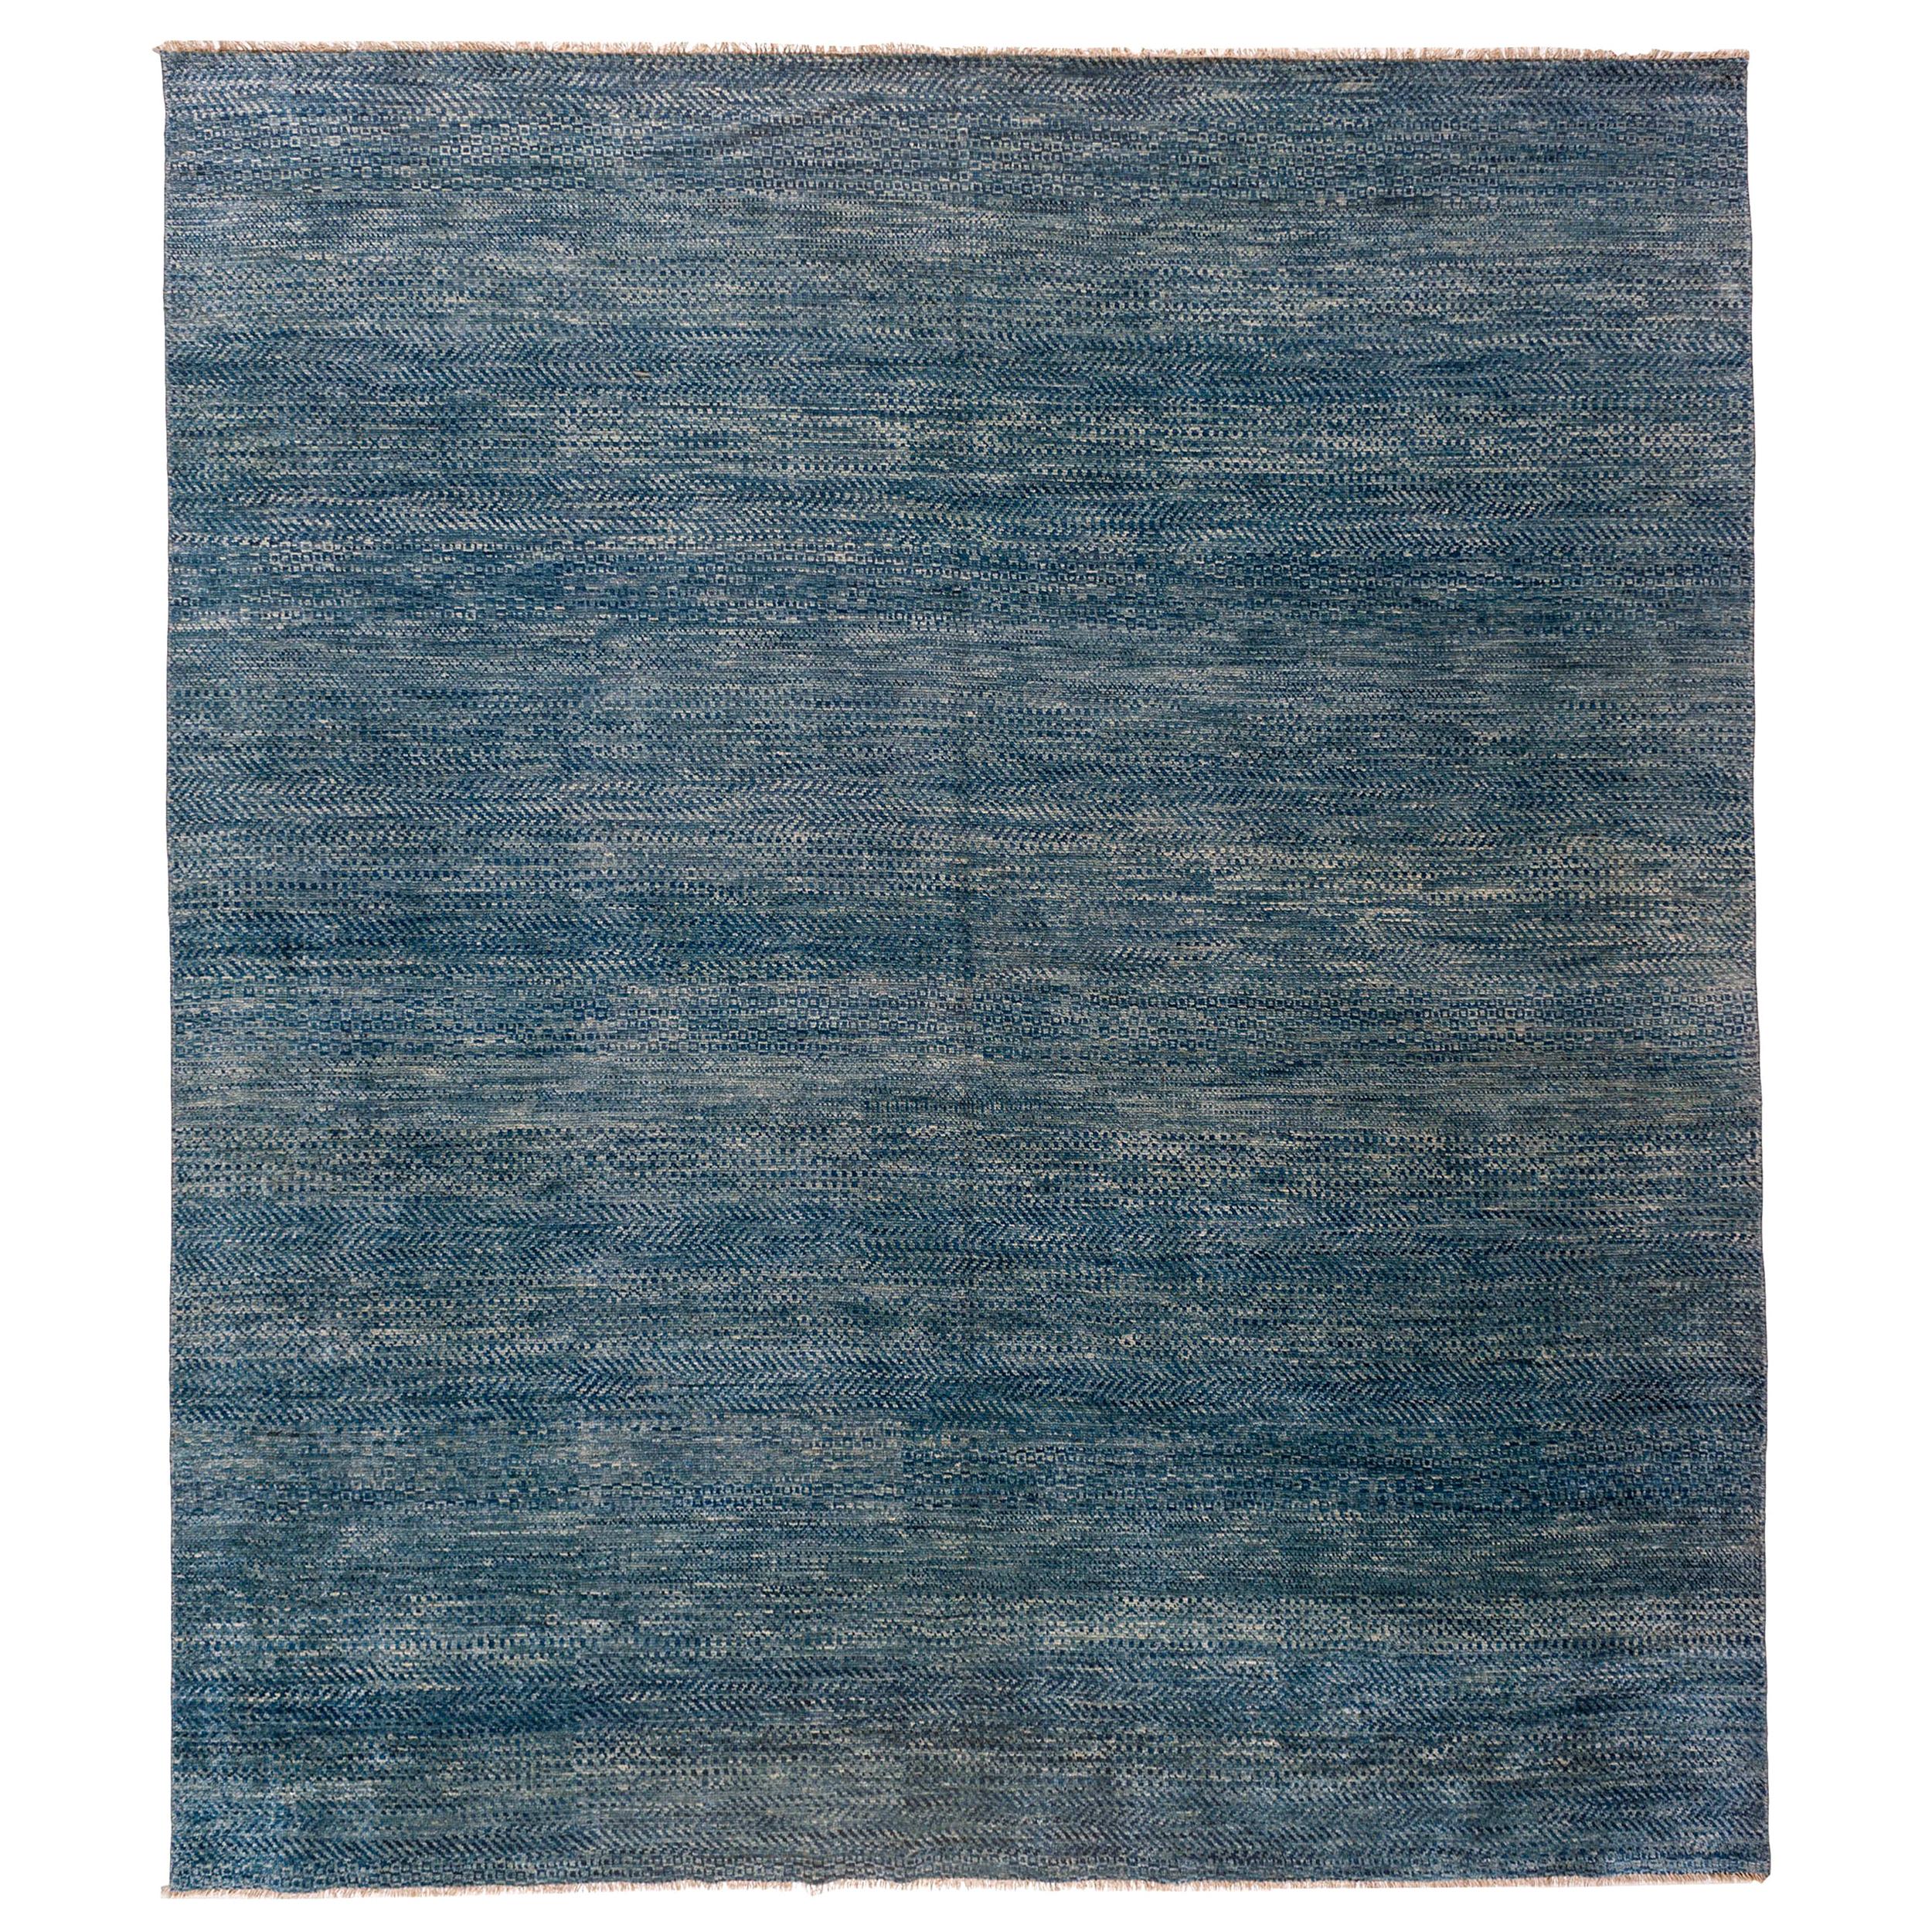 Blue and White Patchwork Look Area Rug For Sale